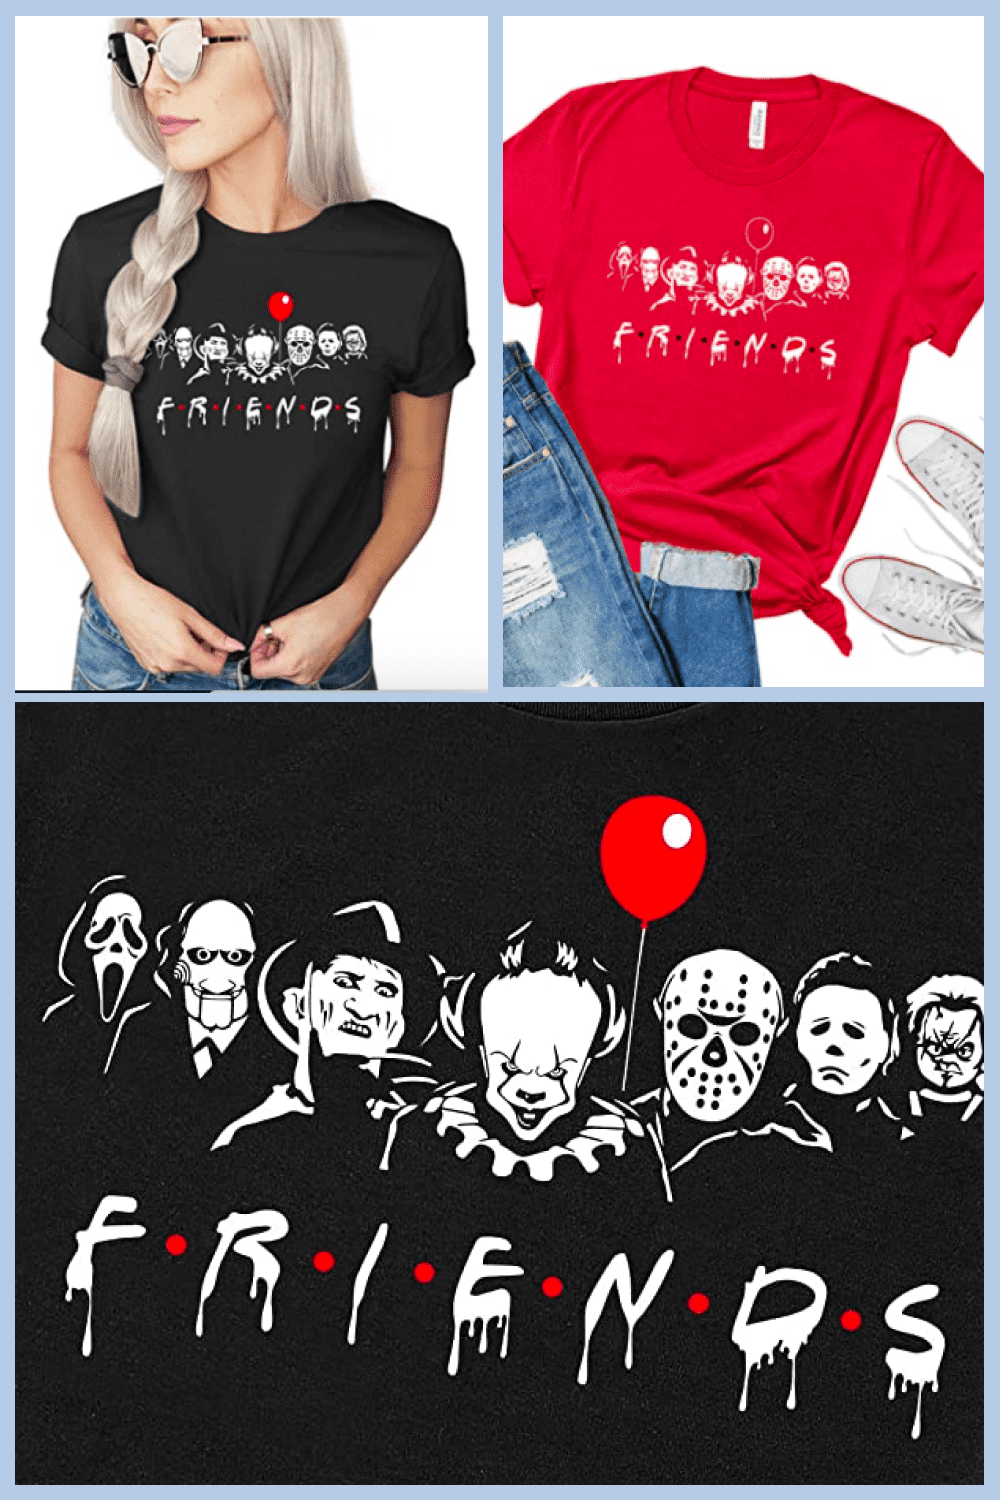 This is a Halloween combo featuring some of the most famous killers from the movies.